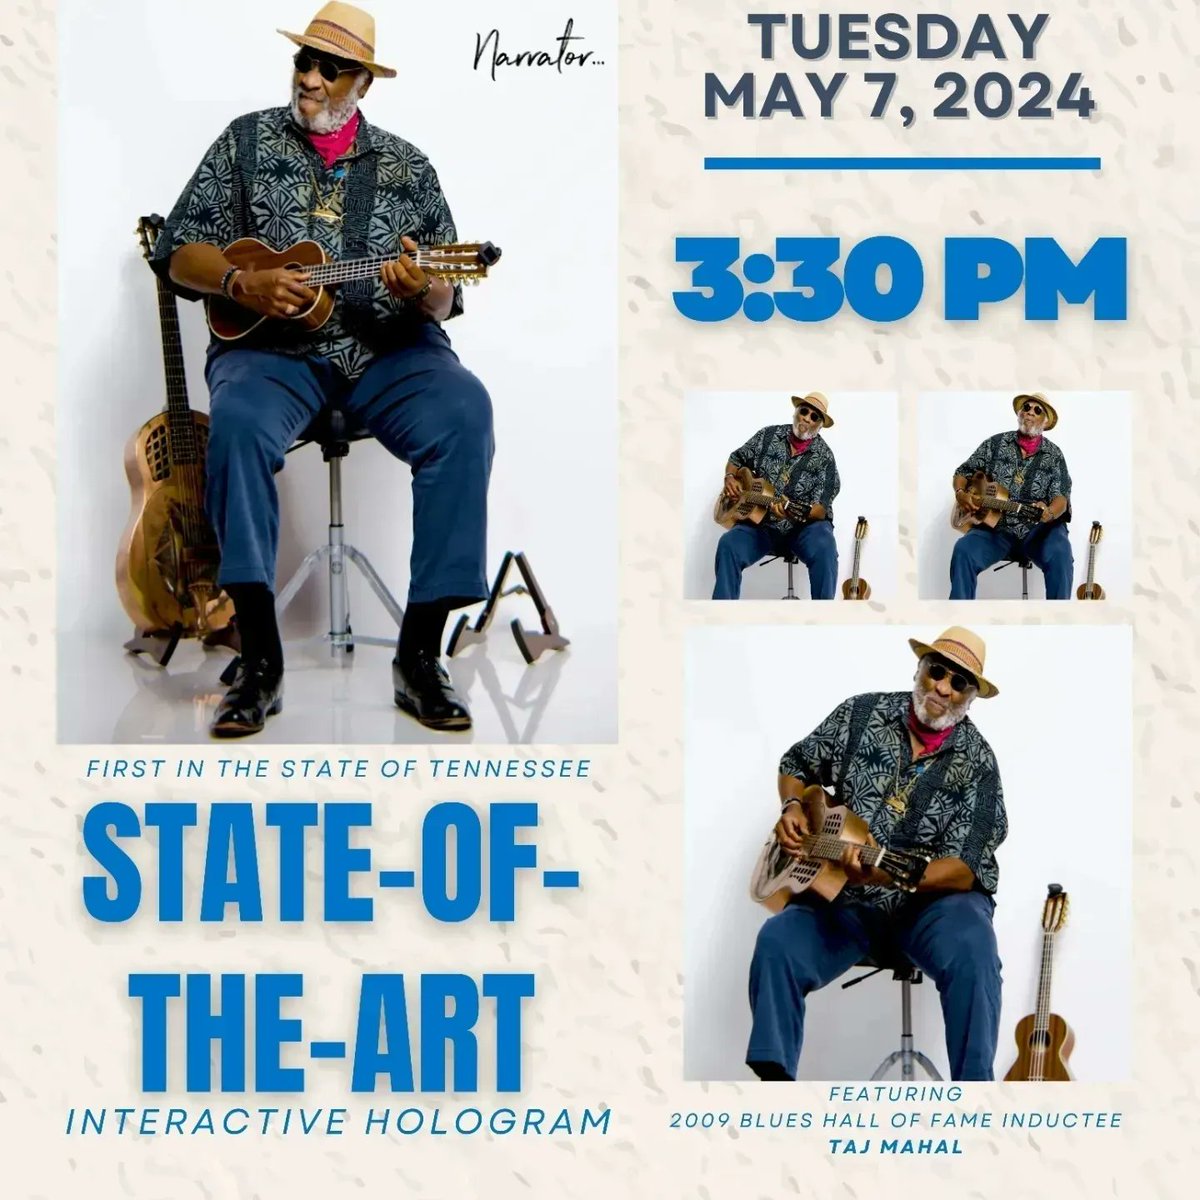 Join Tavis as he hosts the 45th Annual Blues Music Awards in Memphis, Thursday, May 9, 2024! The Blues Foundation preserves blues heritage, celebrates blues recording and performance, expands worldwide awareness of the blues, and ensures the future of this uniquely American art.